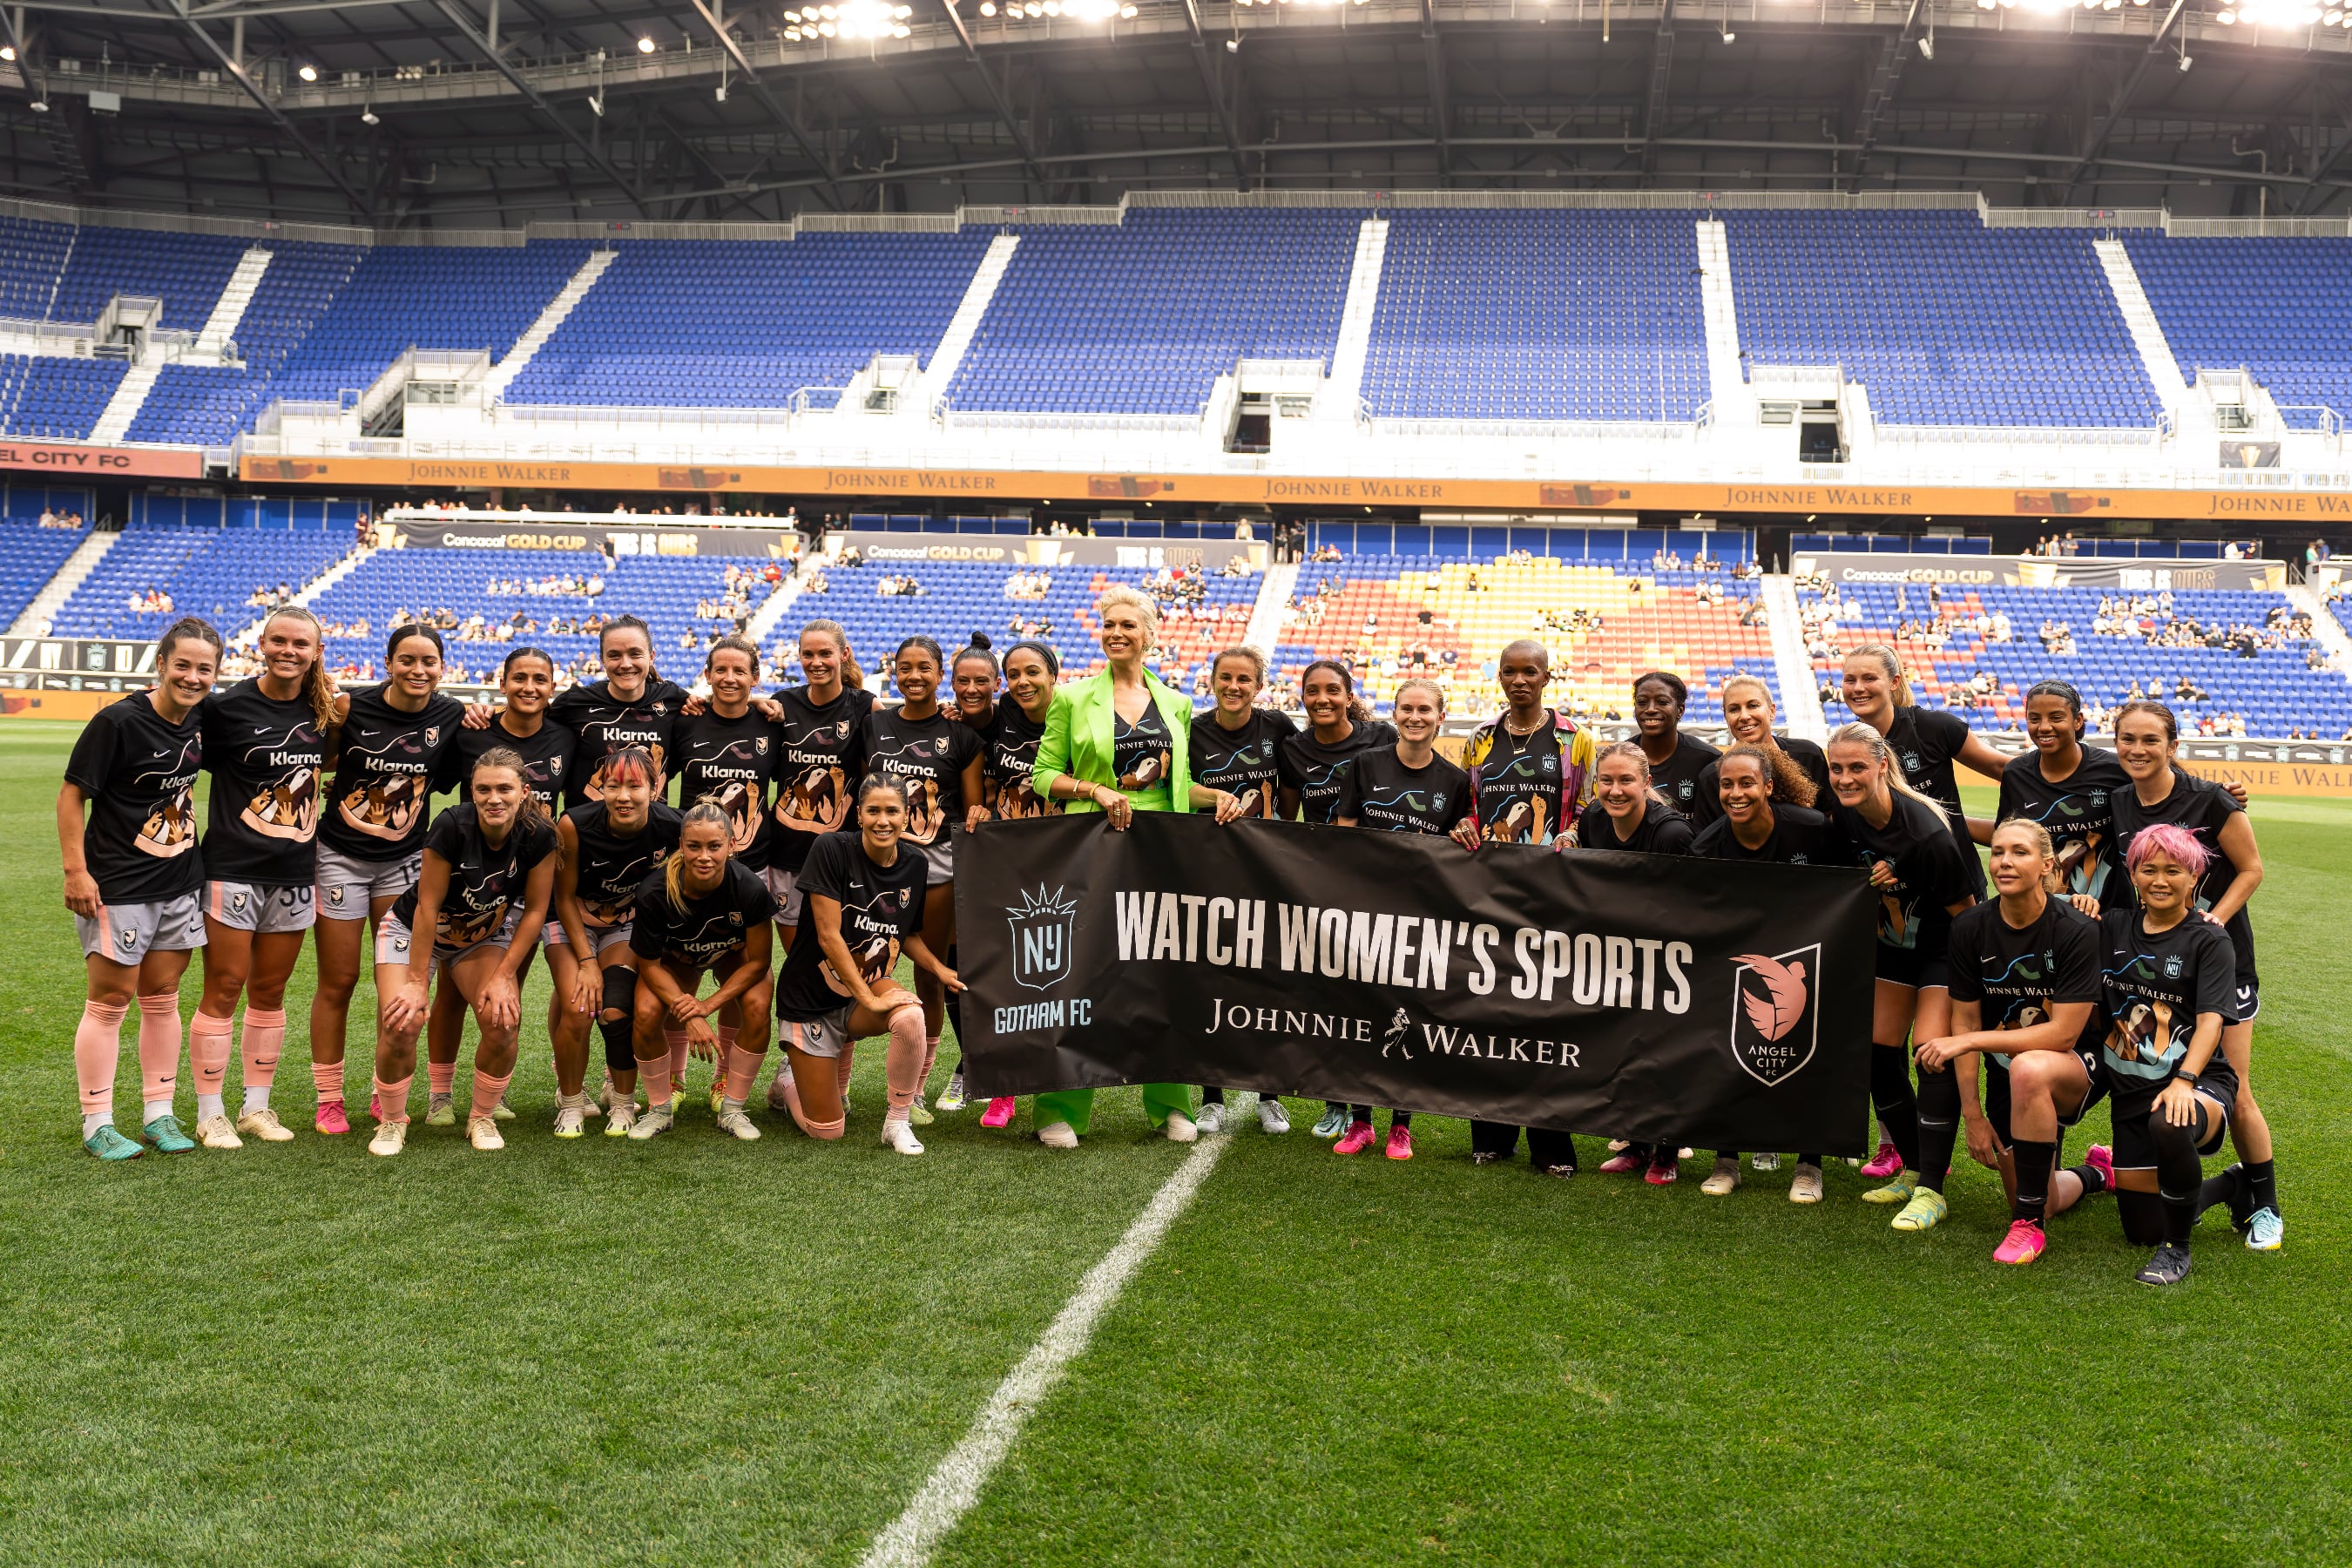 Hannah Waddingham and Monica Ahanonu join Gotham FC and Angel City FC Players in presenting Watch Women's Sports during Johnnie Walker's Women's Gotham FC v. Angel City FC Empowerment Game at Red Bull Arena on July 2